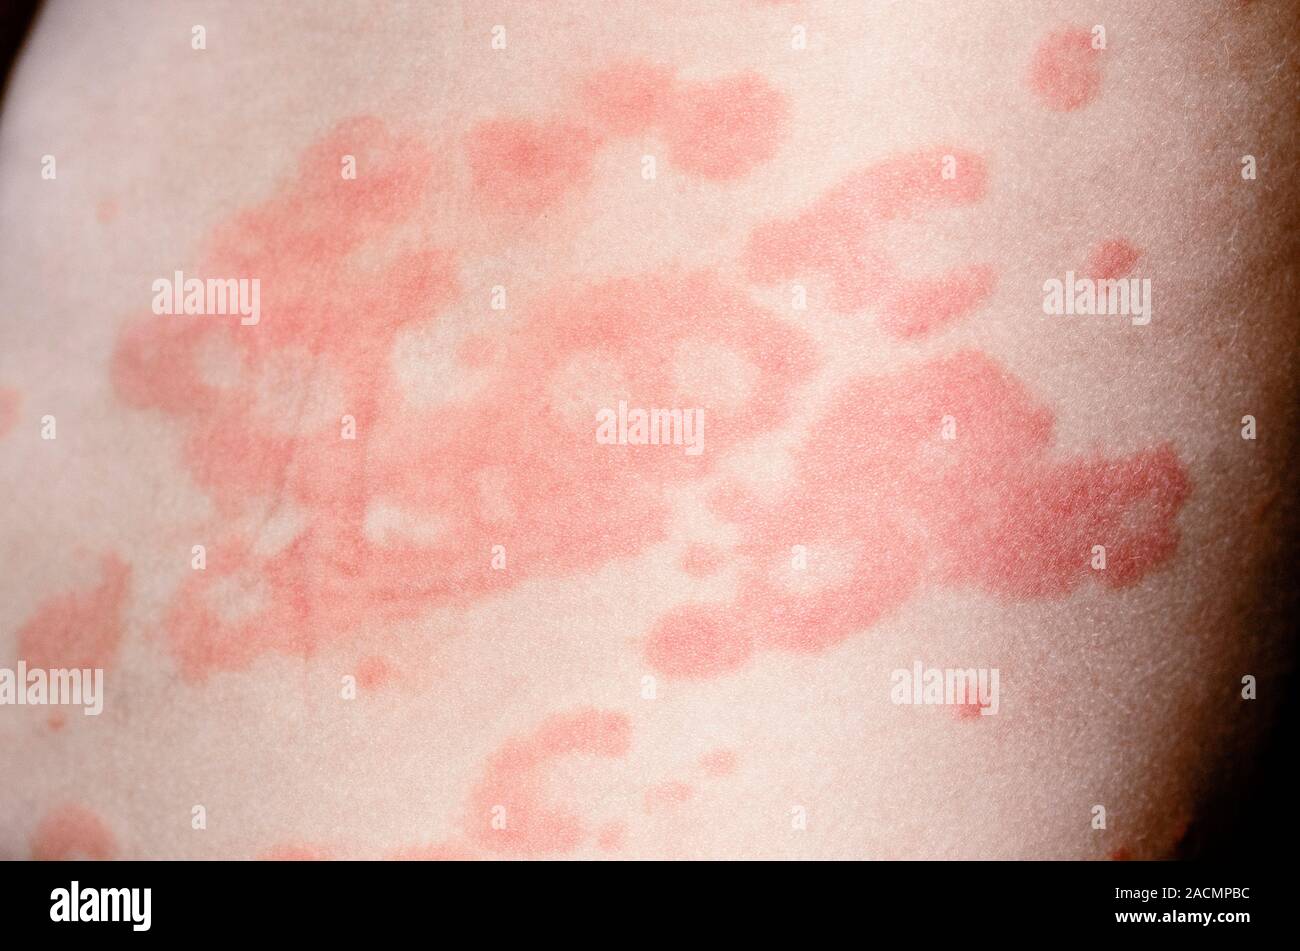 Red rash (hives or nettle rash) on the skin in a 2 year old male patient caused by urticaria, a rash of itchy wheals that in this case was secondary t Stock Photo